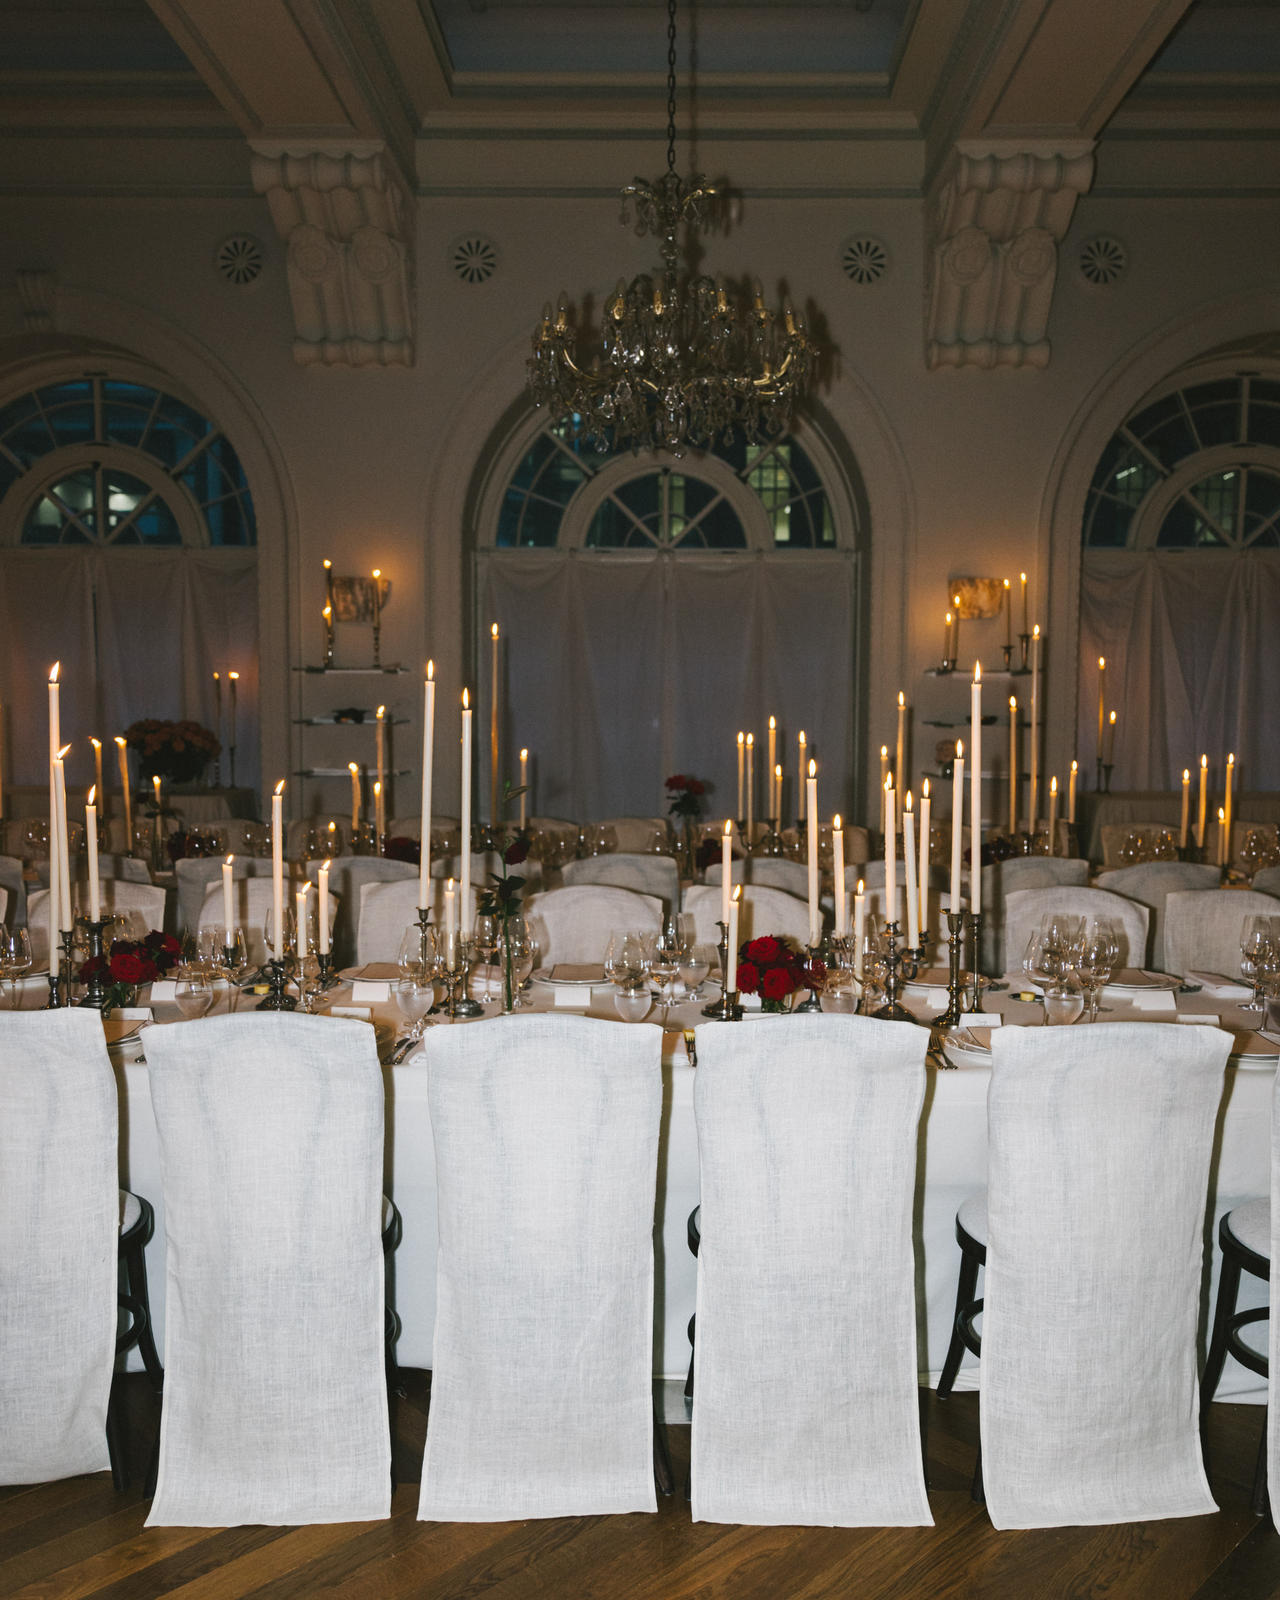 Starry night: The ultimate wedding package